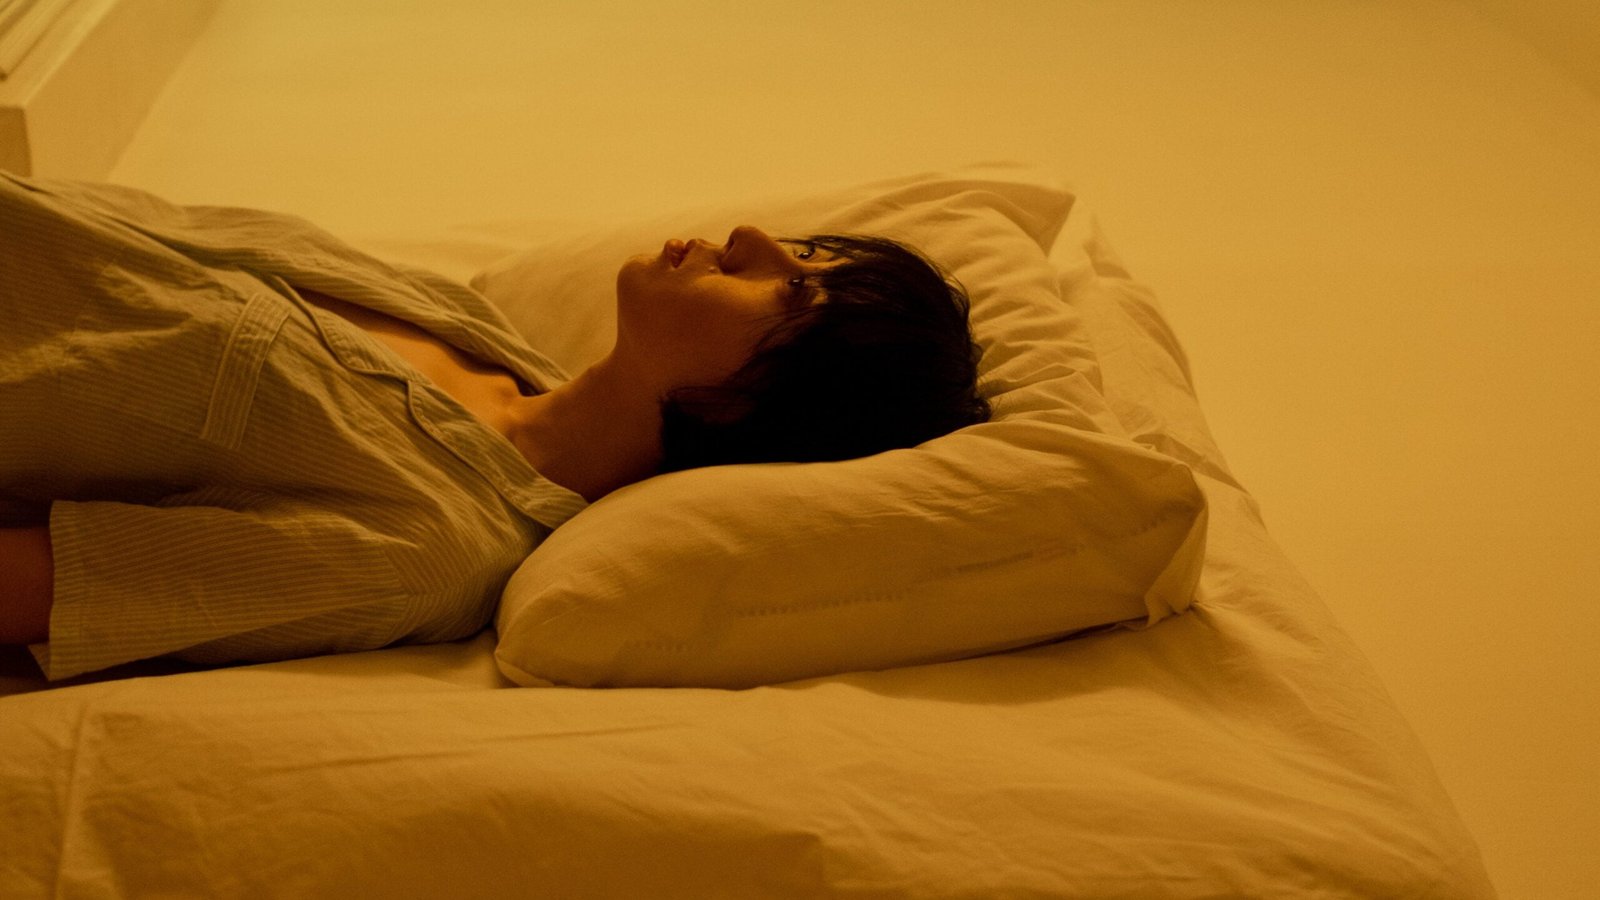 A woman lying comfortably on a pillow practicing sense initiated lucid dreaming